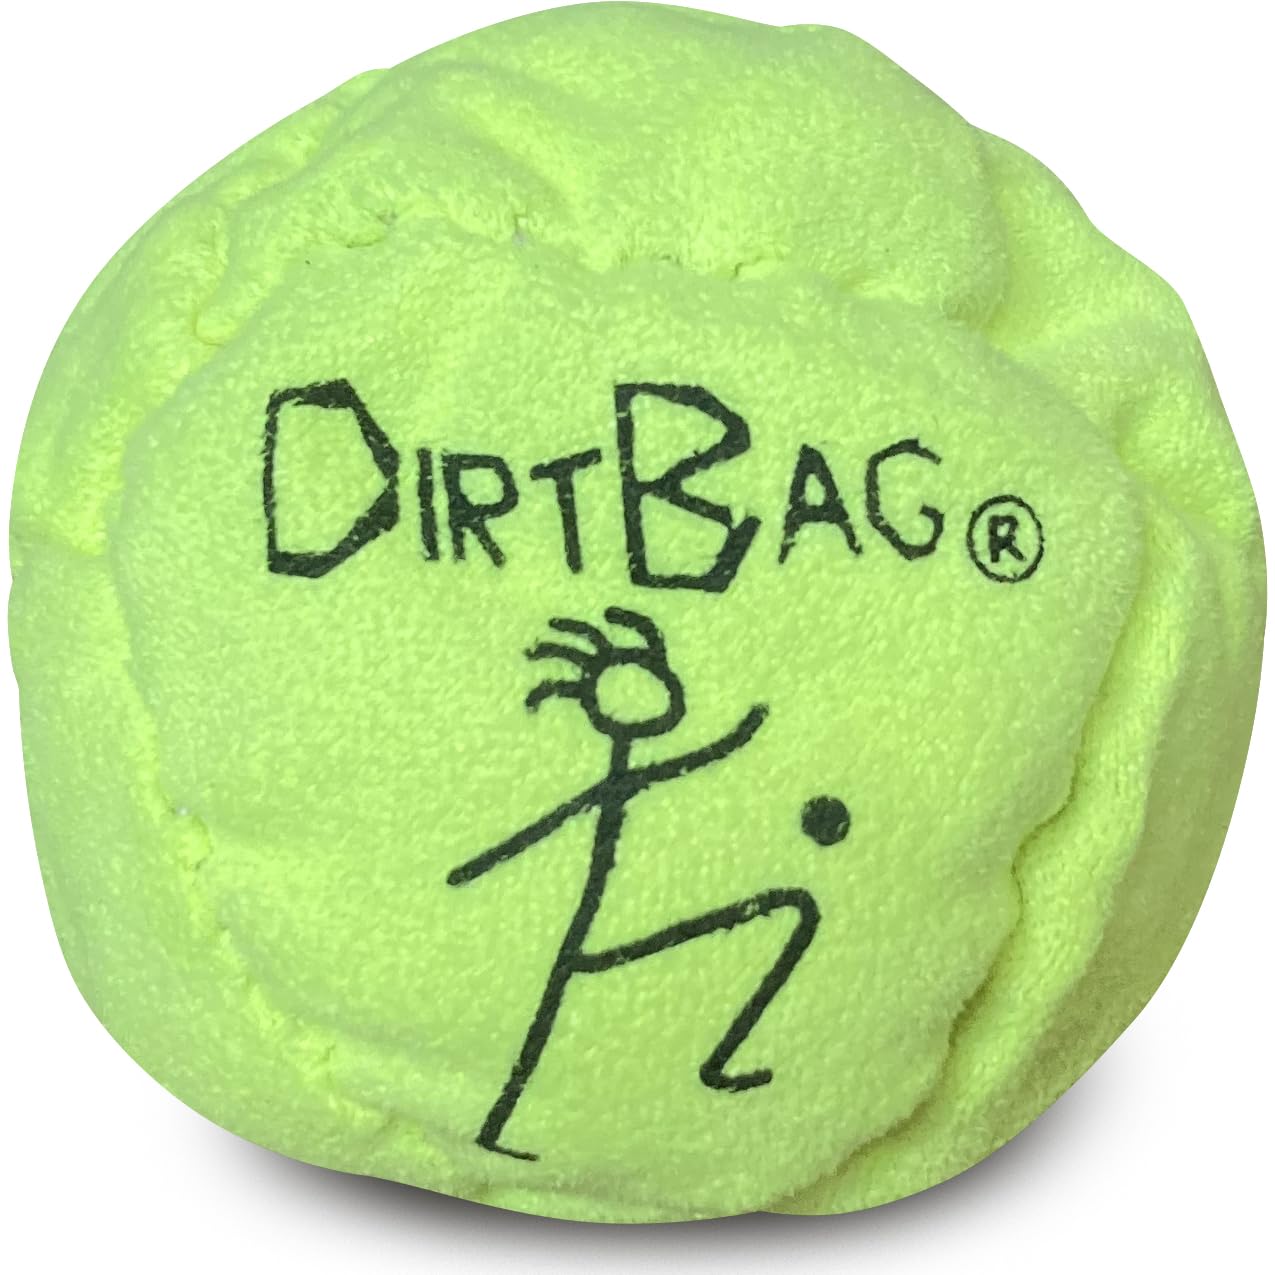 World Footbag Dirtbag Footbag 8-Panel Synthetic Suede and Sand Filled Hacky Sack Footbag | Neon Yellow (PN: 4711)